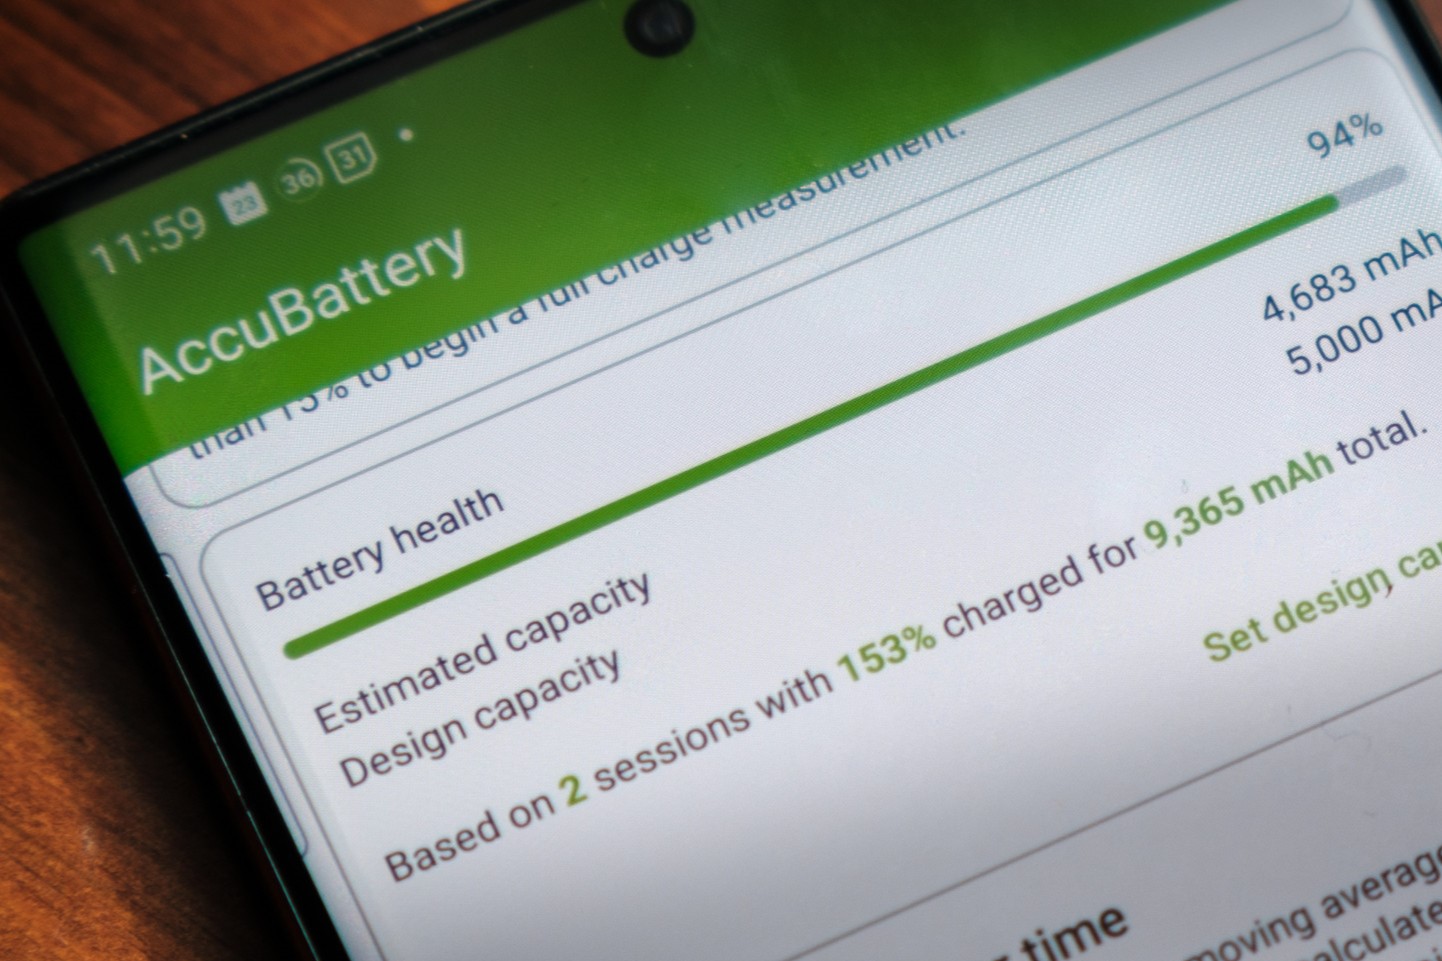 checking-battery-health-on-xiaomi-step-by-step-tutorial